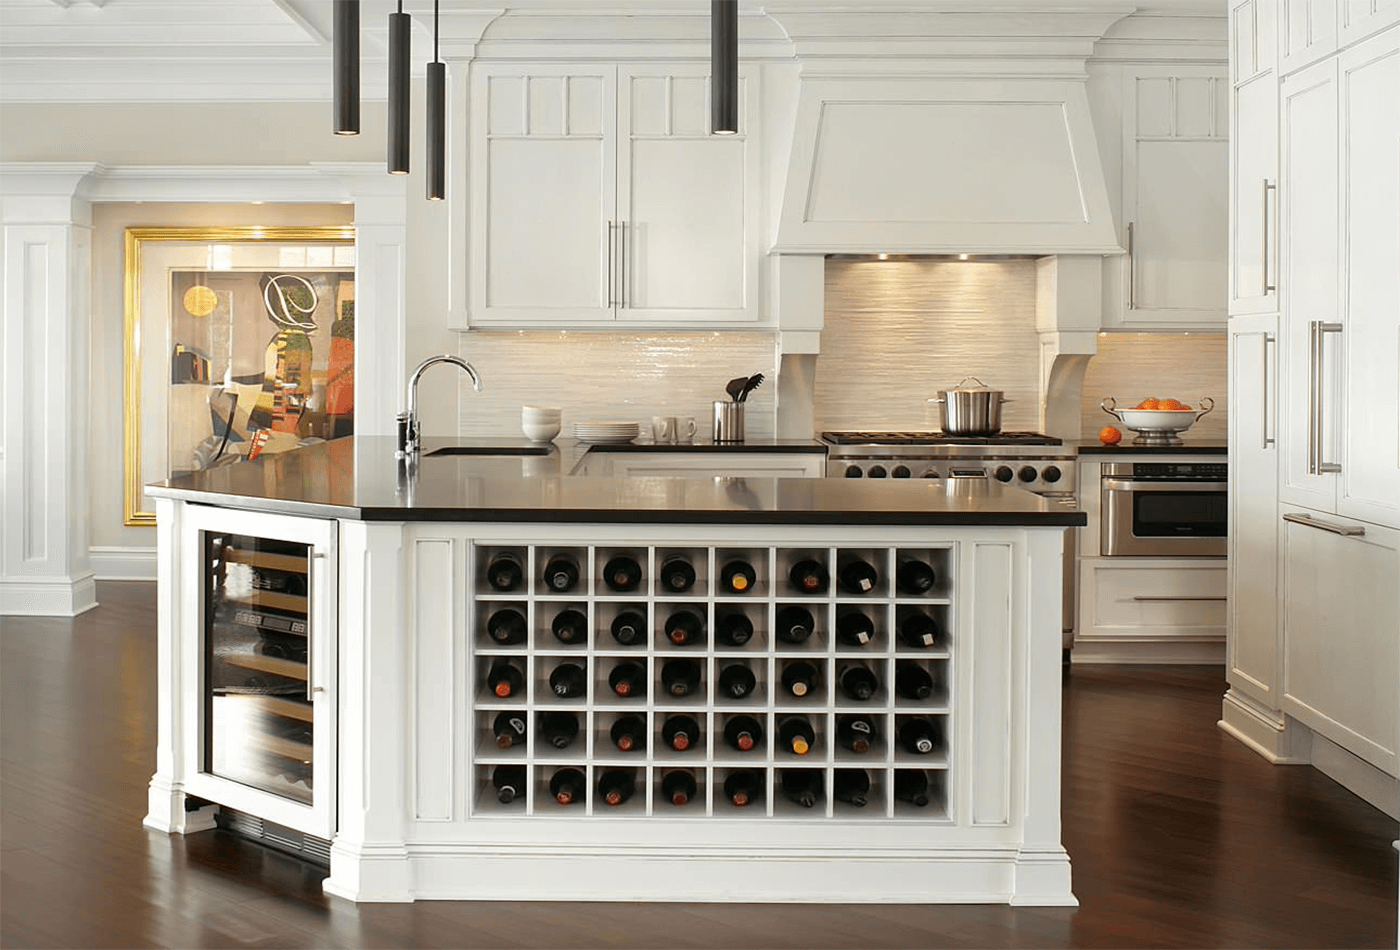 Can You Use Kitchen For Wine Storage?